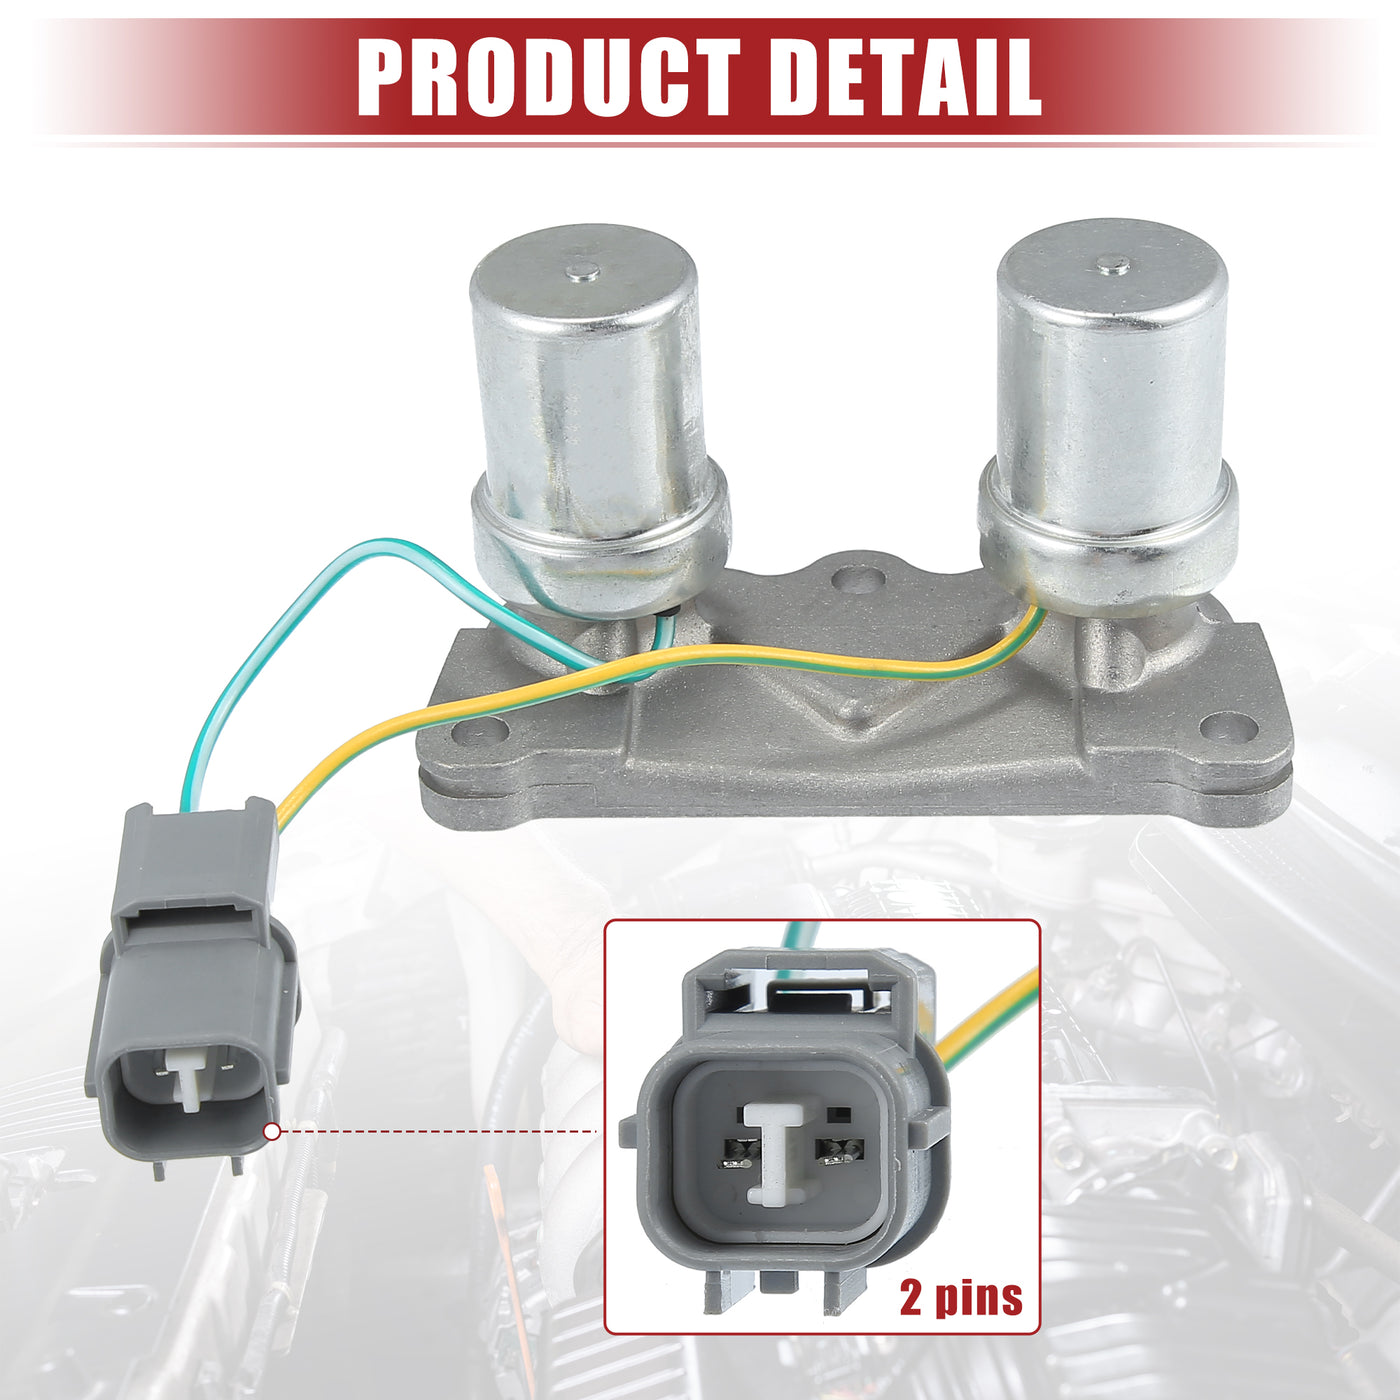 ACROPIX Transmission Shift Solenoid Replacement Fit for Acura Integra - Pack of 1 Silver Tone Gray